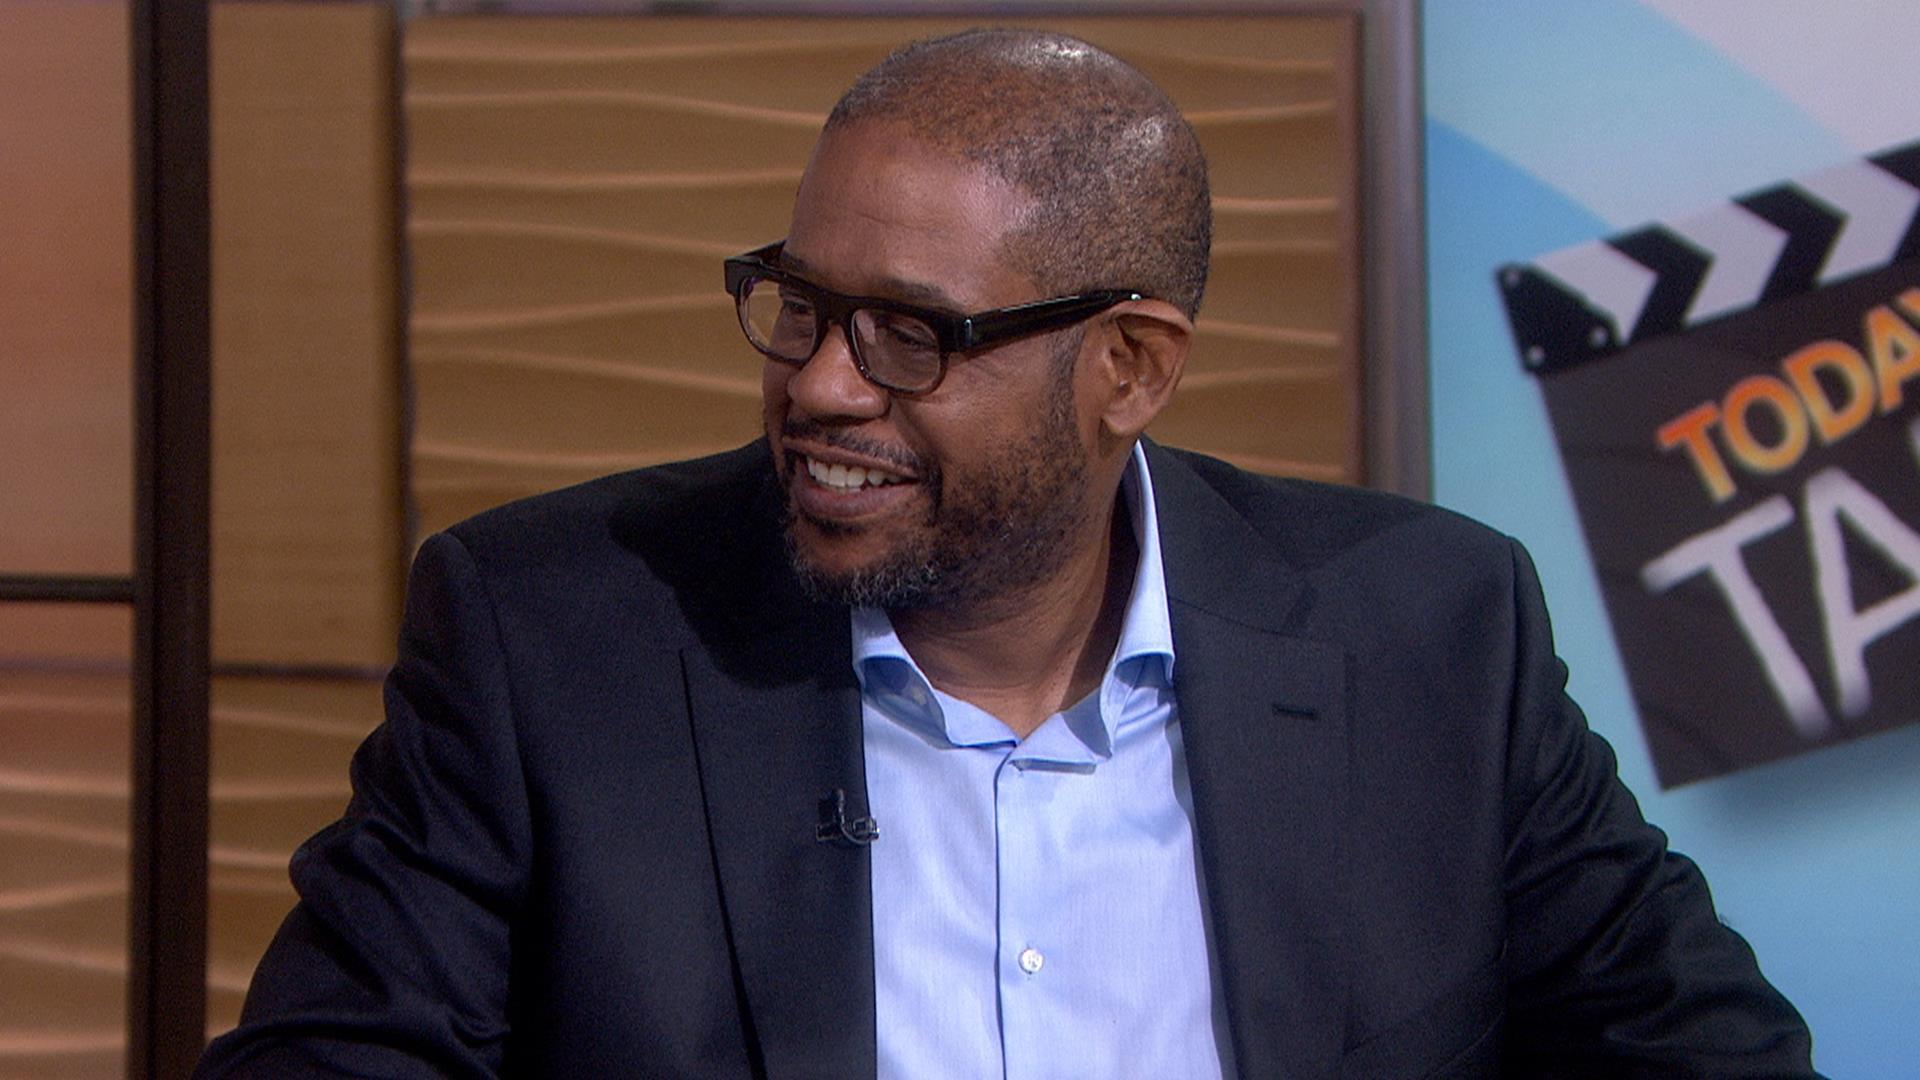 Forest Whitaker talks about Broadway debut, new 'Star Wars' project